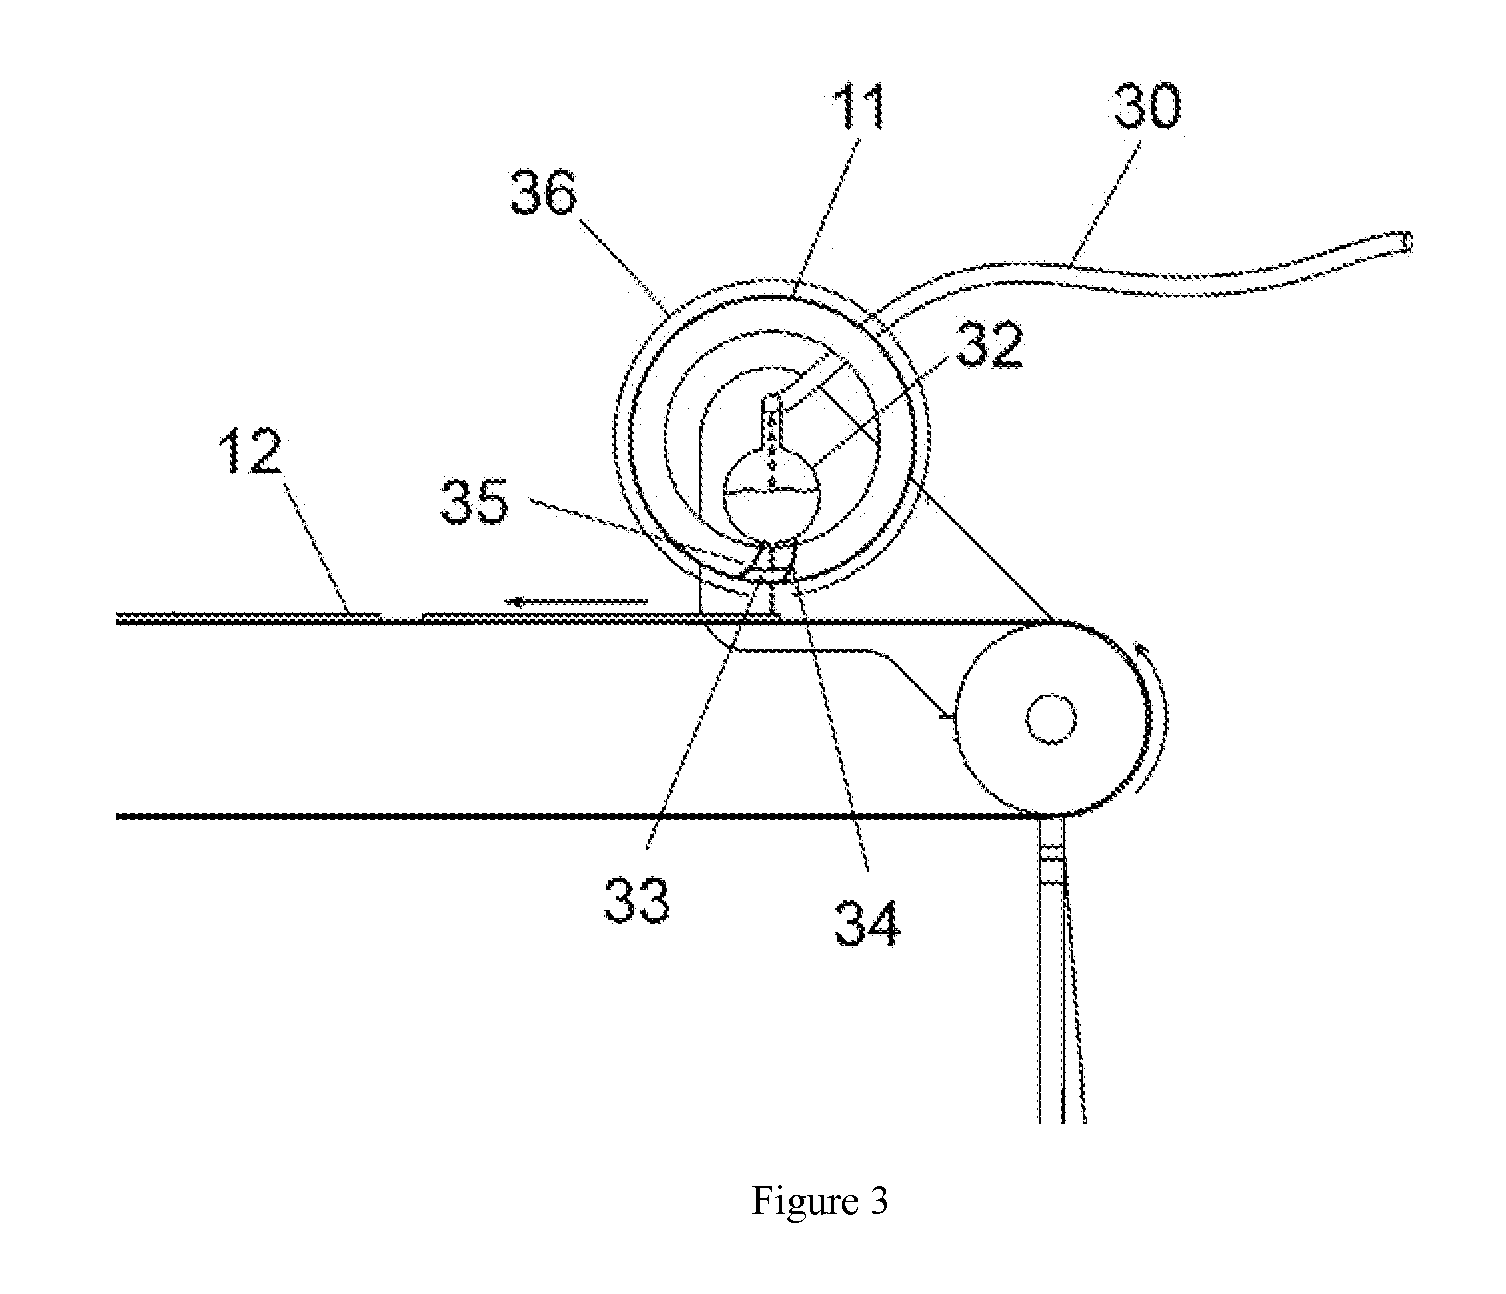 Method and apparatus for rapid production of injera bread